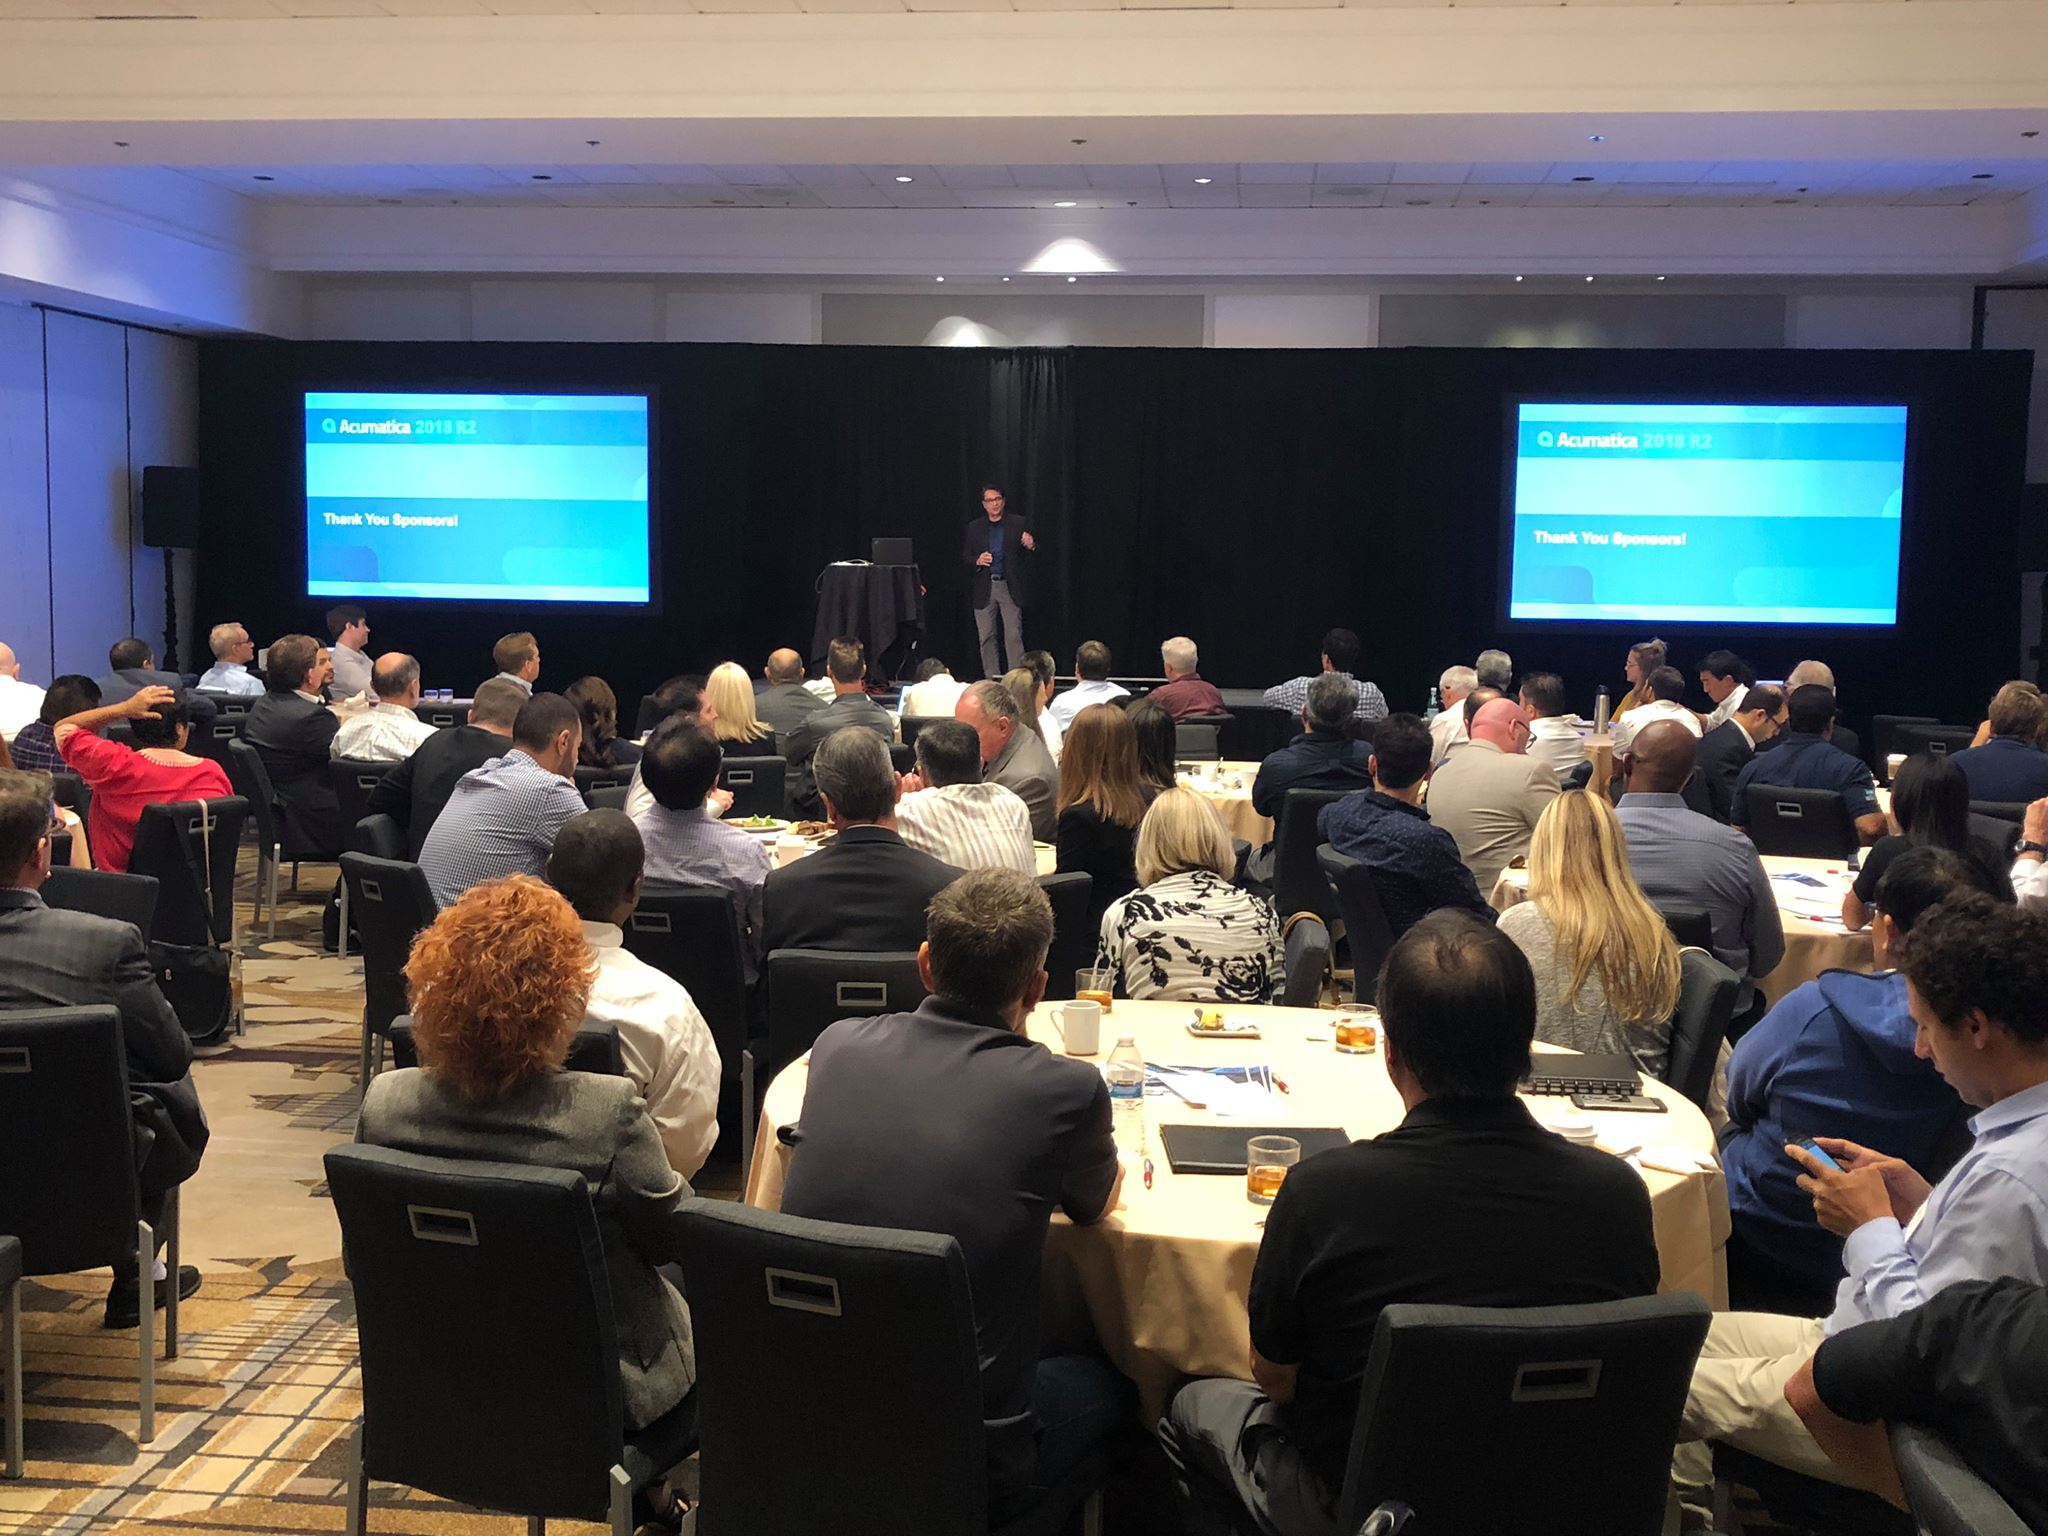 A packed house at our Launch Event in Anaheim, California.